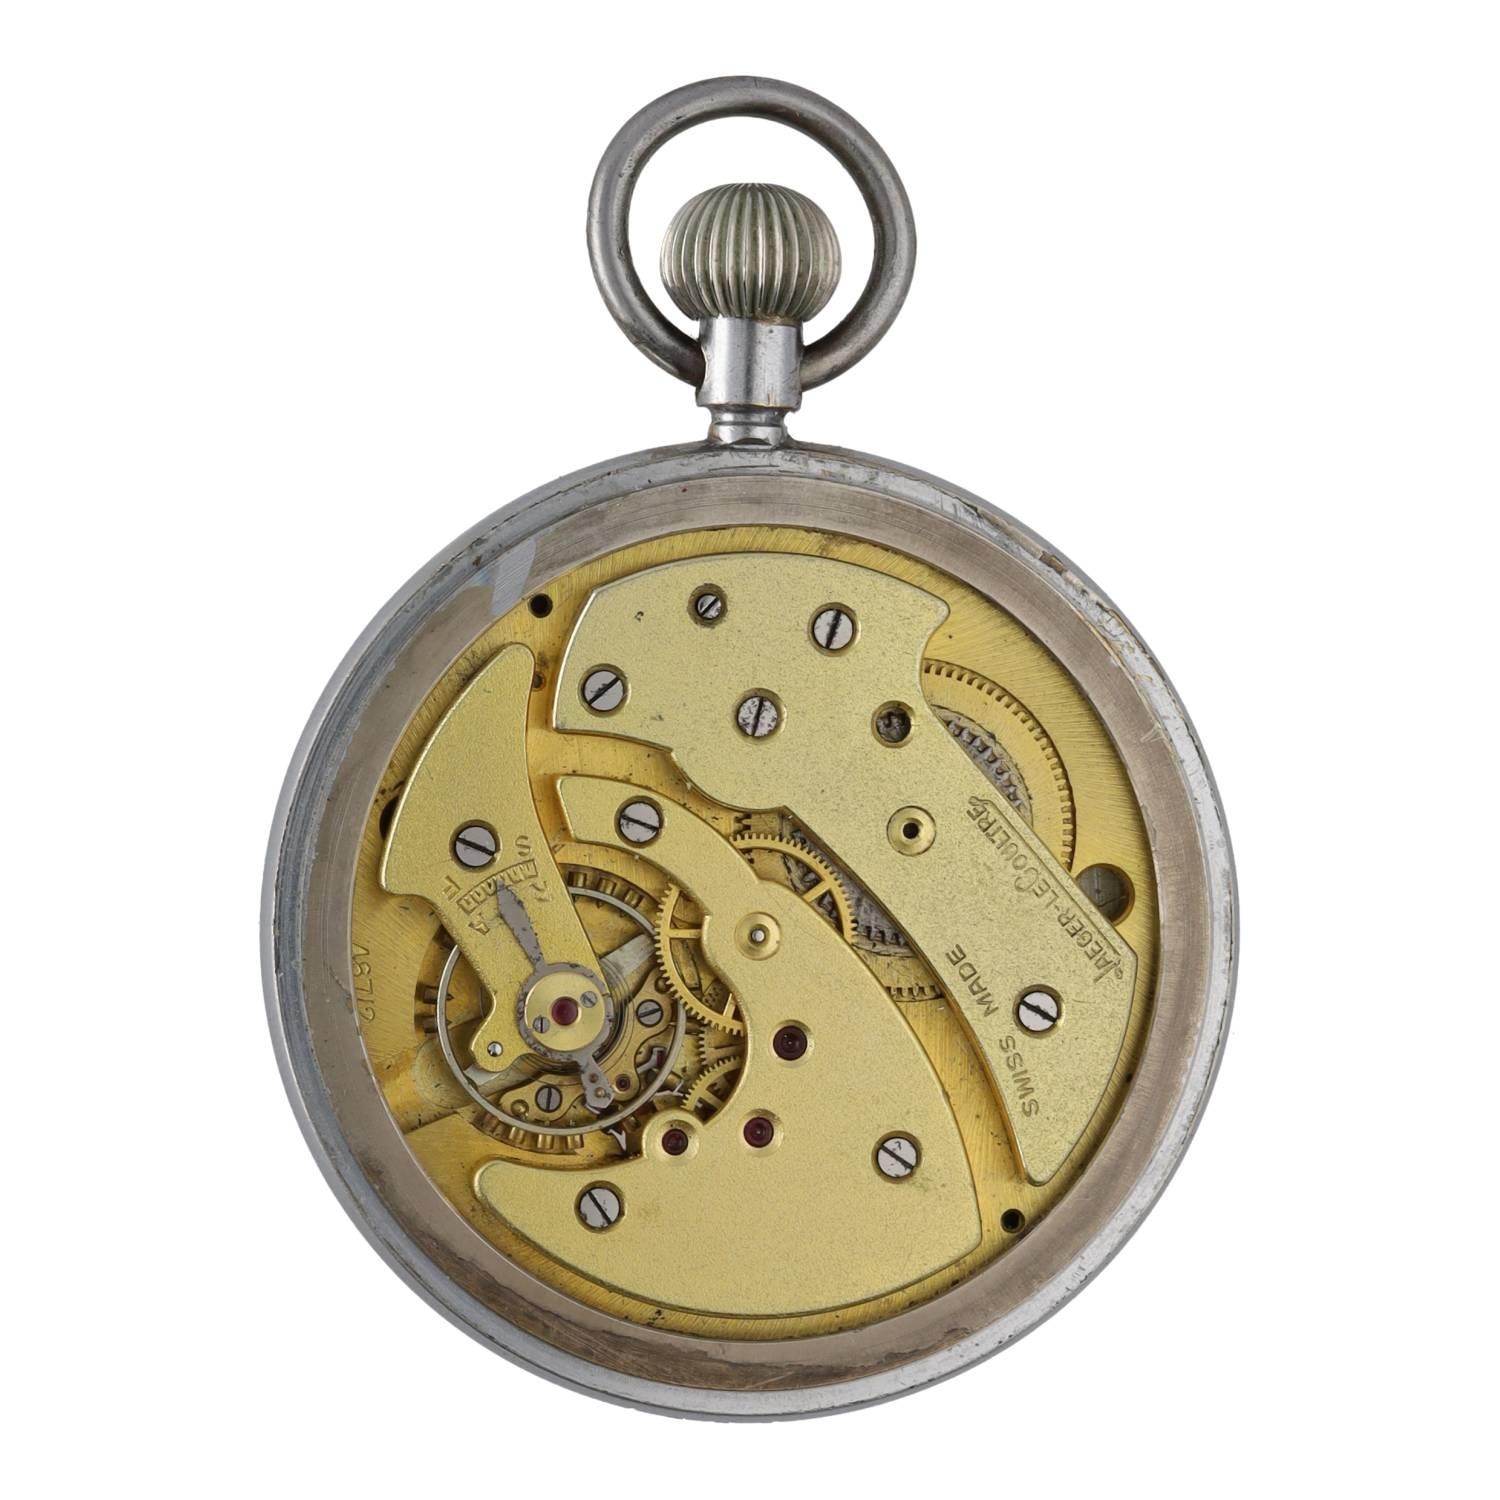 Jaeger-LeCoultre WWII British Military Army issue nickel cased lever pocket watch, signed cal. 467/2 - Image 2 of 3